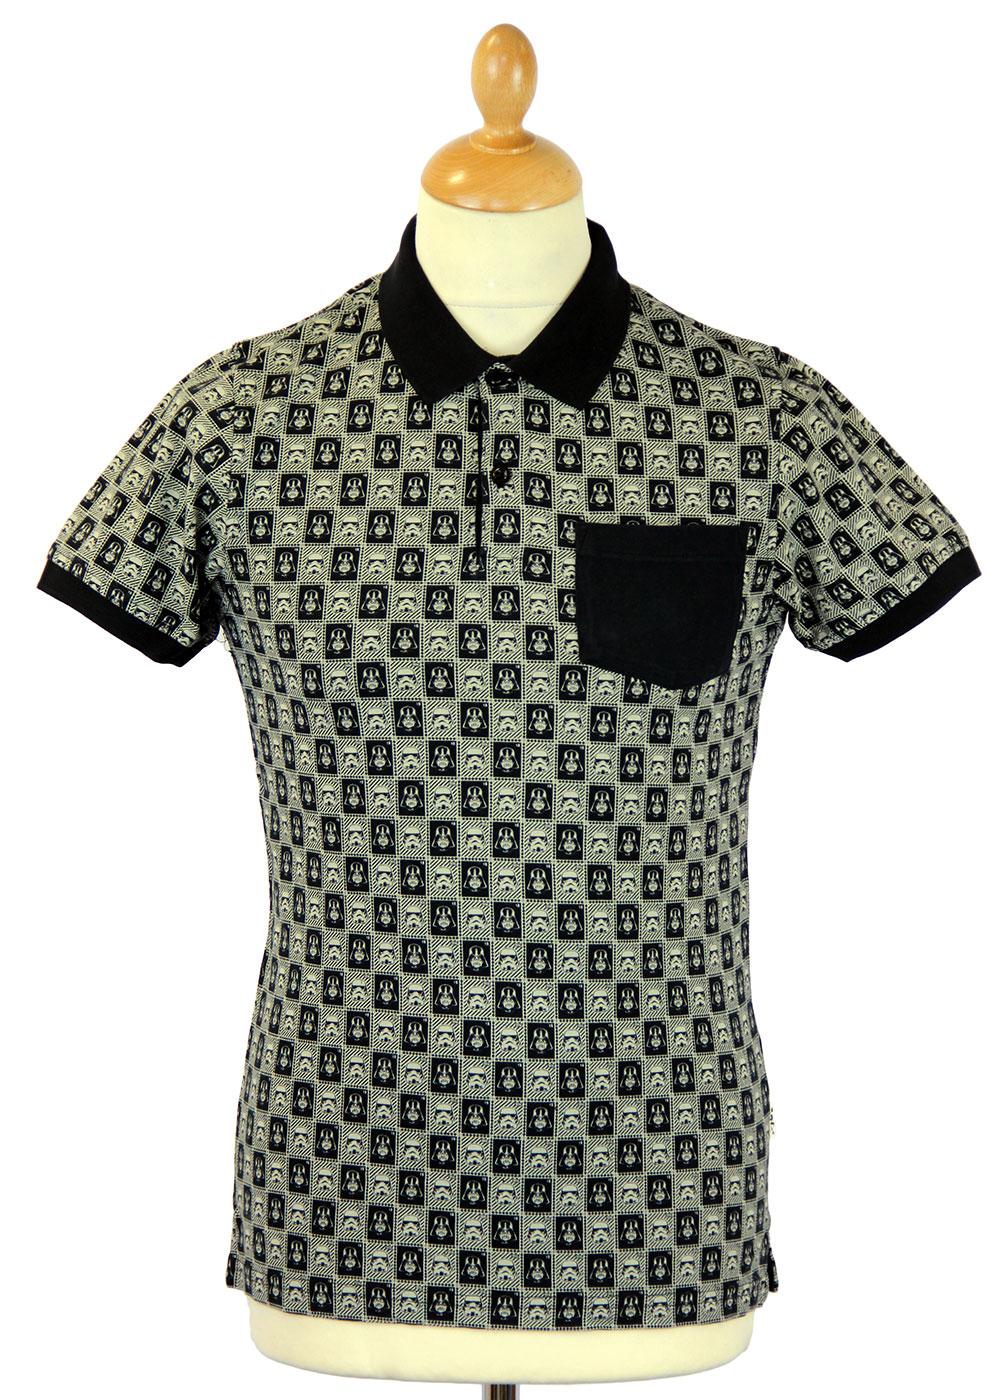 Trooper Stamp CHUNK Retro 70s Indie Star Wars Polo